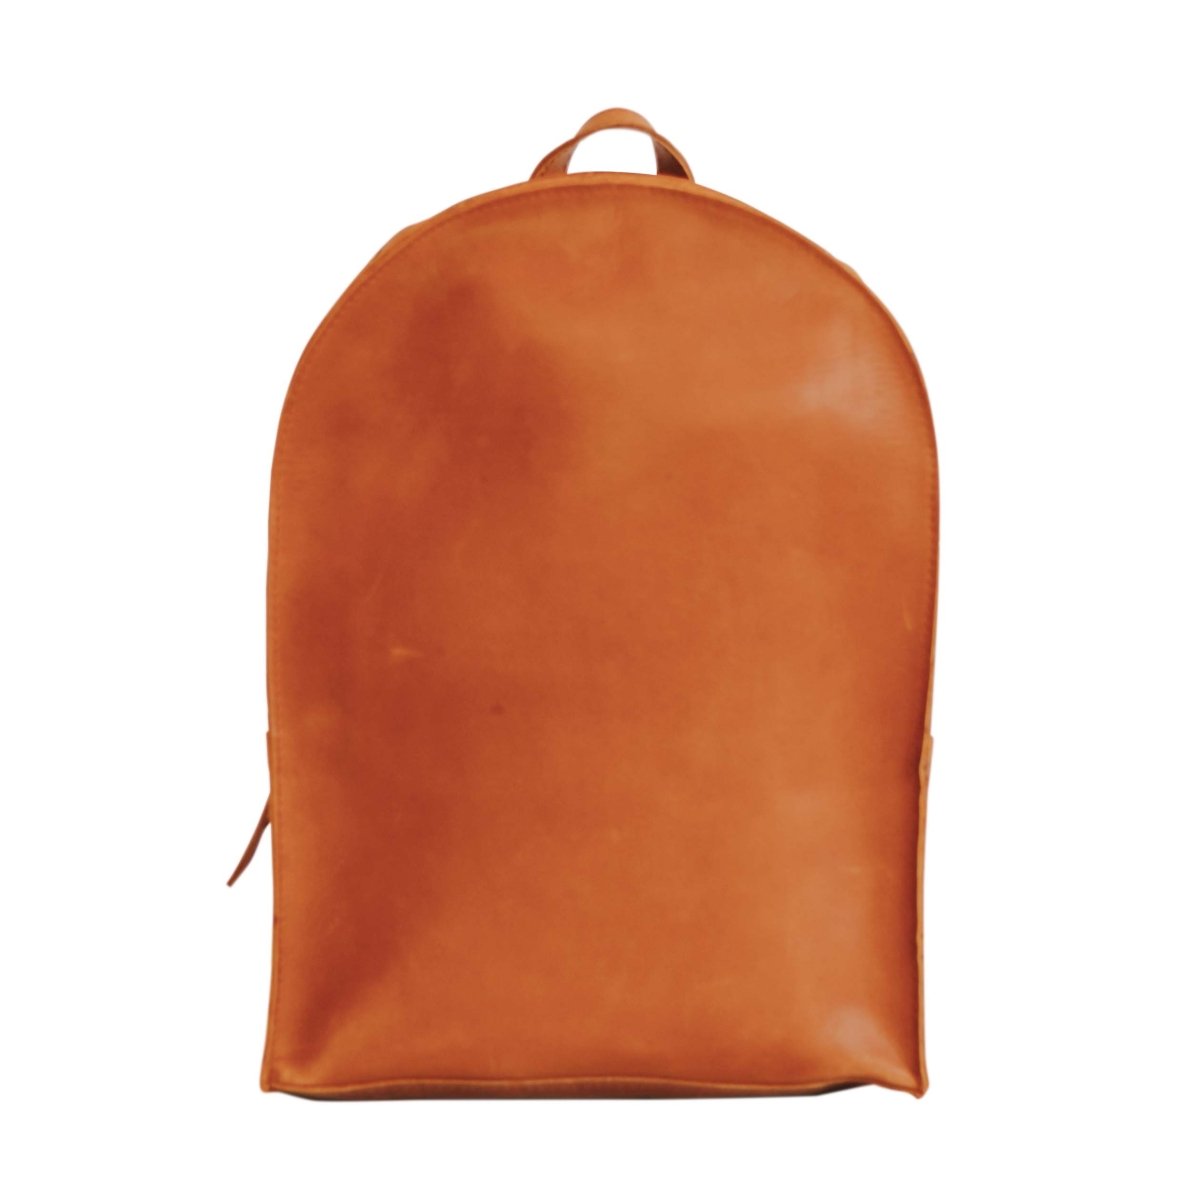 Imani Collective Selah Leather Backpack - lily & onyx